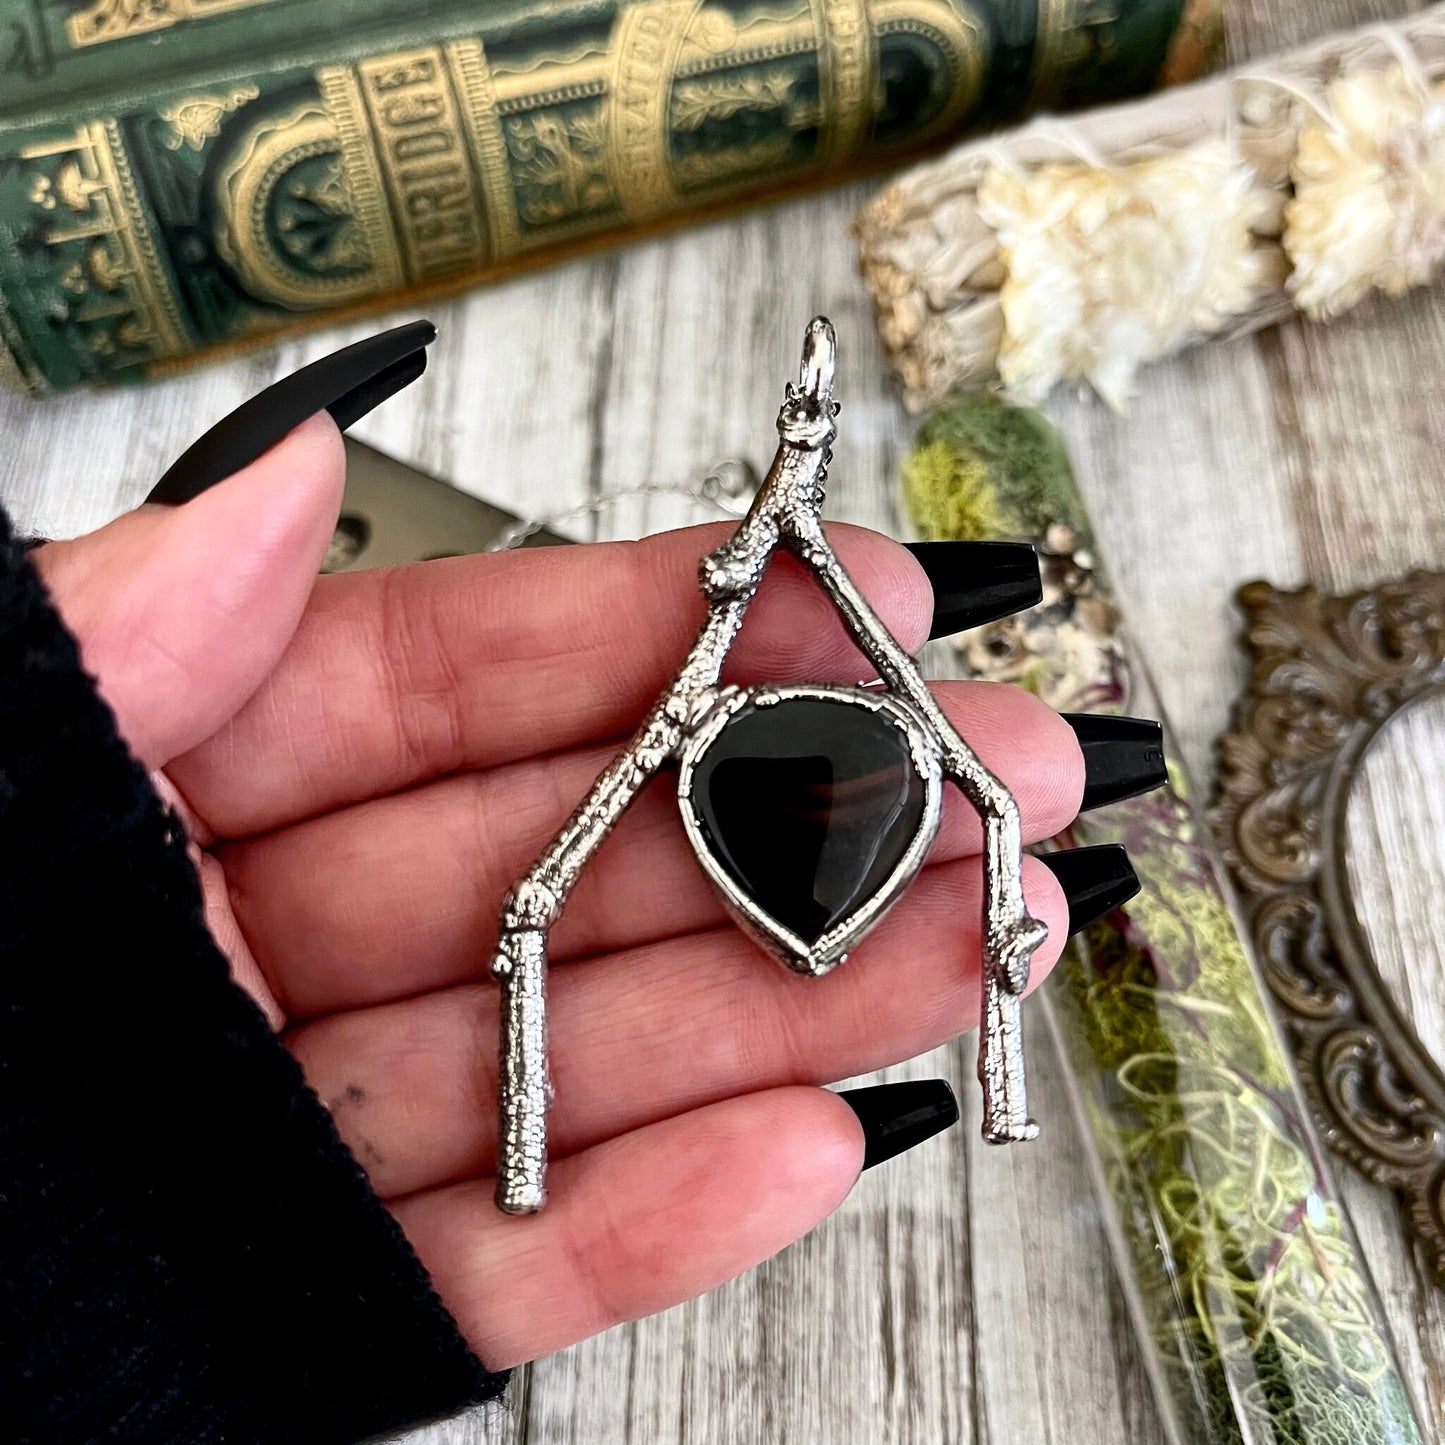 Sticks & Stones Collection- Montana Moss Agate Crystal Necklace in Silver // Big Crystal Necklace / Natural Wood Stone Necklace Pendant